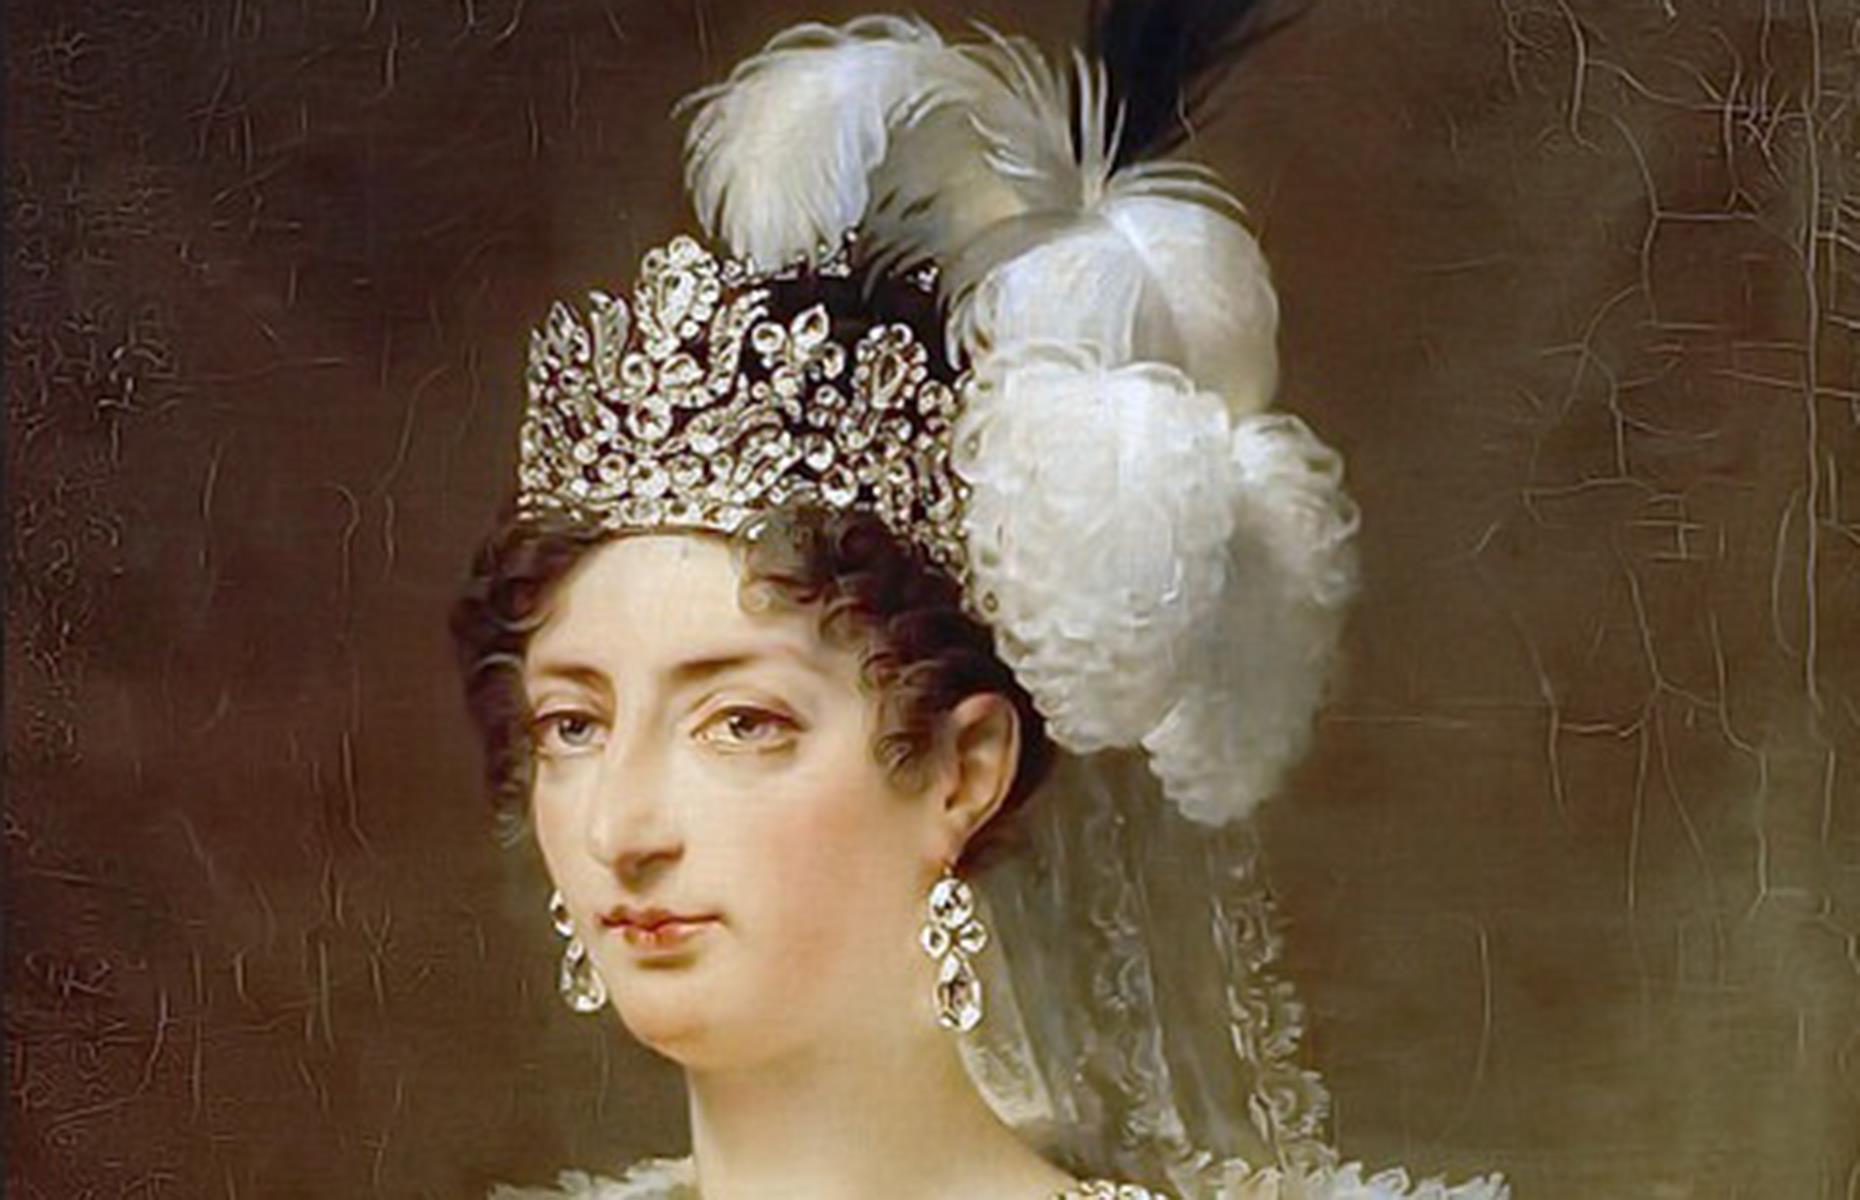 <p>The union of Marie Antoinette and Louis XVI was meant to bring peace and prosperity to both France and Austria, yet the relationship was plagued with problems from the get-go.</p>  <p>The primary issue was Louis XVI's refusal to consummate their marriage. This became the subject of much gossip and ridicule at court and among the public, casting the first of many dark shadows over the queen.</p>  <p>Finally, in 1777, a staggering seven years after their marriage, the union was consummated. The couple went on to welcome four children over the next decade: Marie-Thérèse Charlotte (born in 1778), Louis Joseph (born in 1781), Louis Charles (born in 1785), and Sophie (born in 1786). Tragically, only Marie-Thérèse-Charlotte (pictured) would survive her childhood, with her siblings all succumbing to illness.</p>